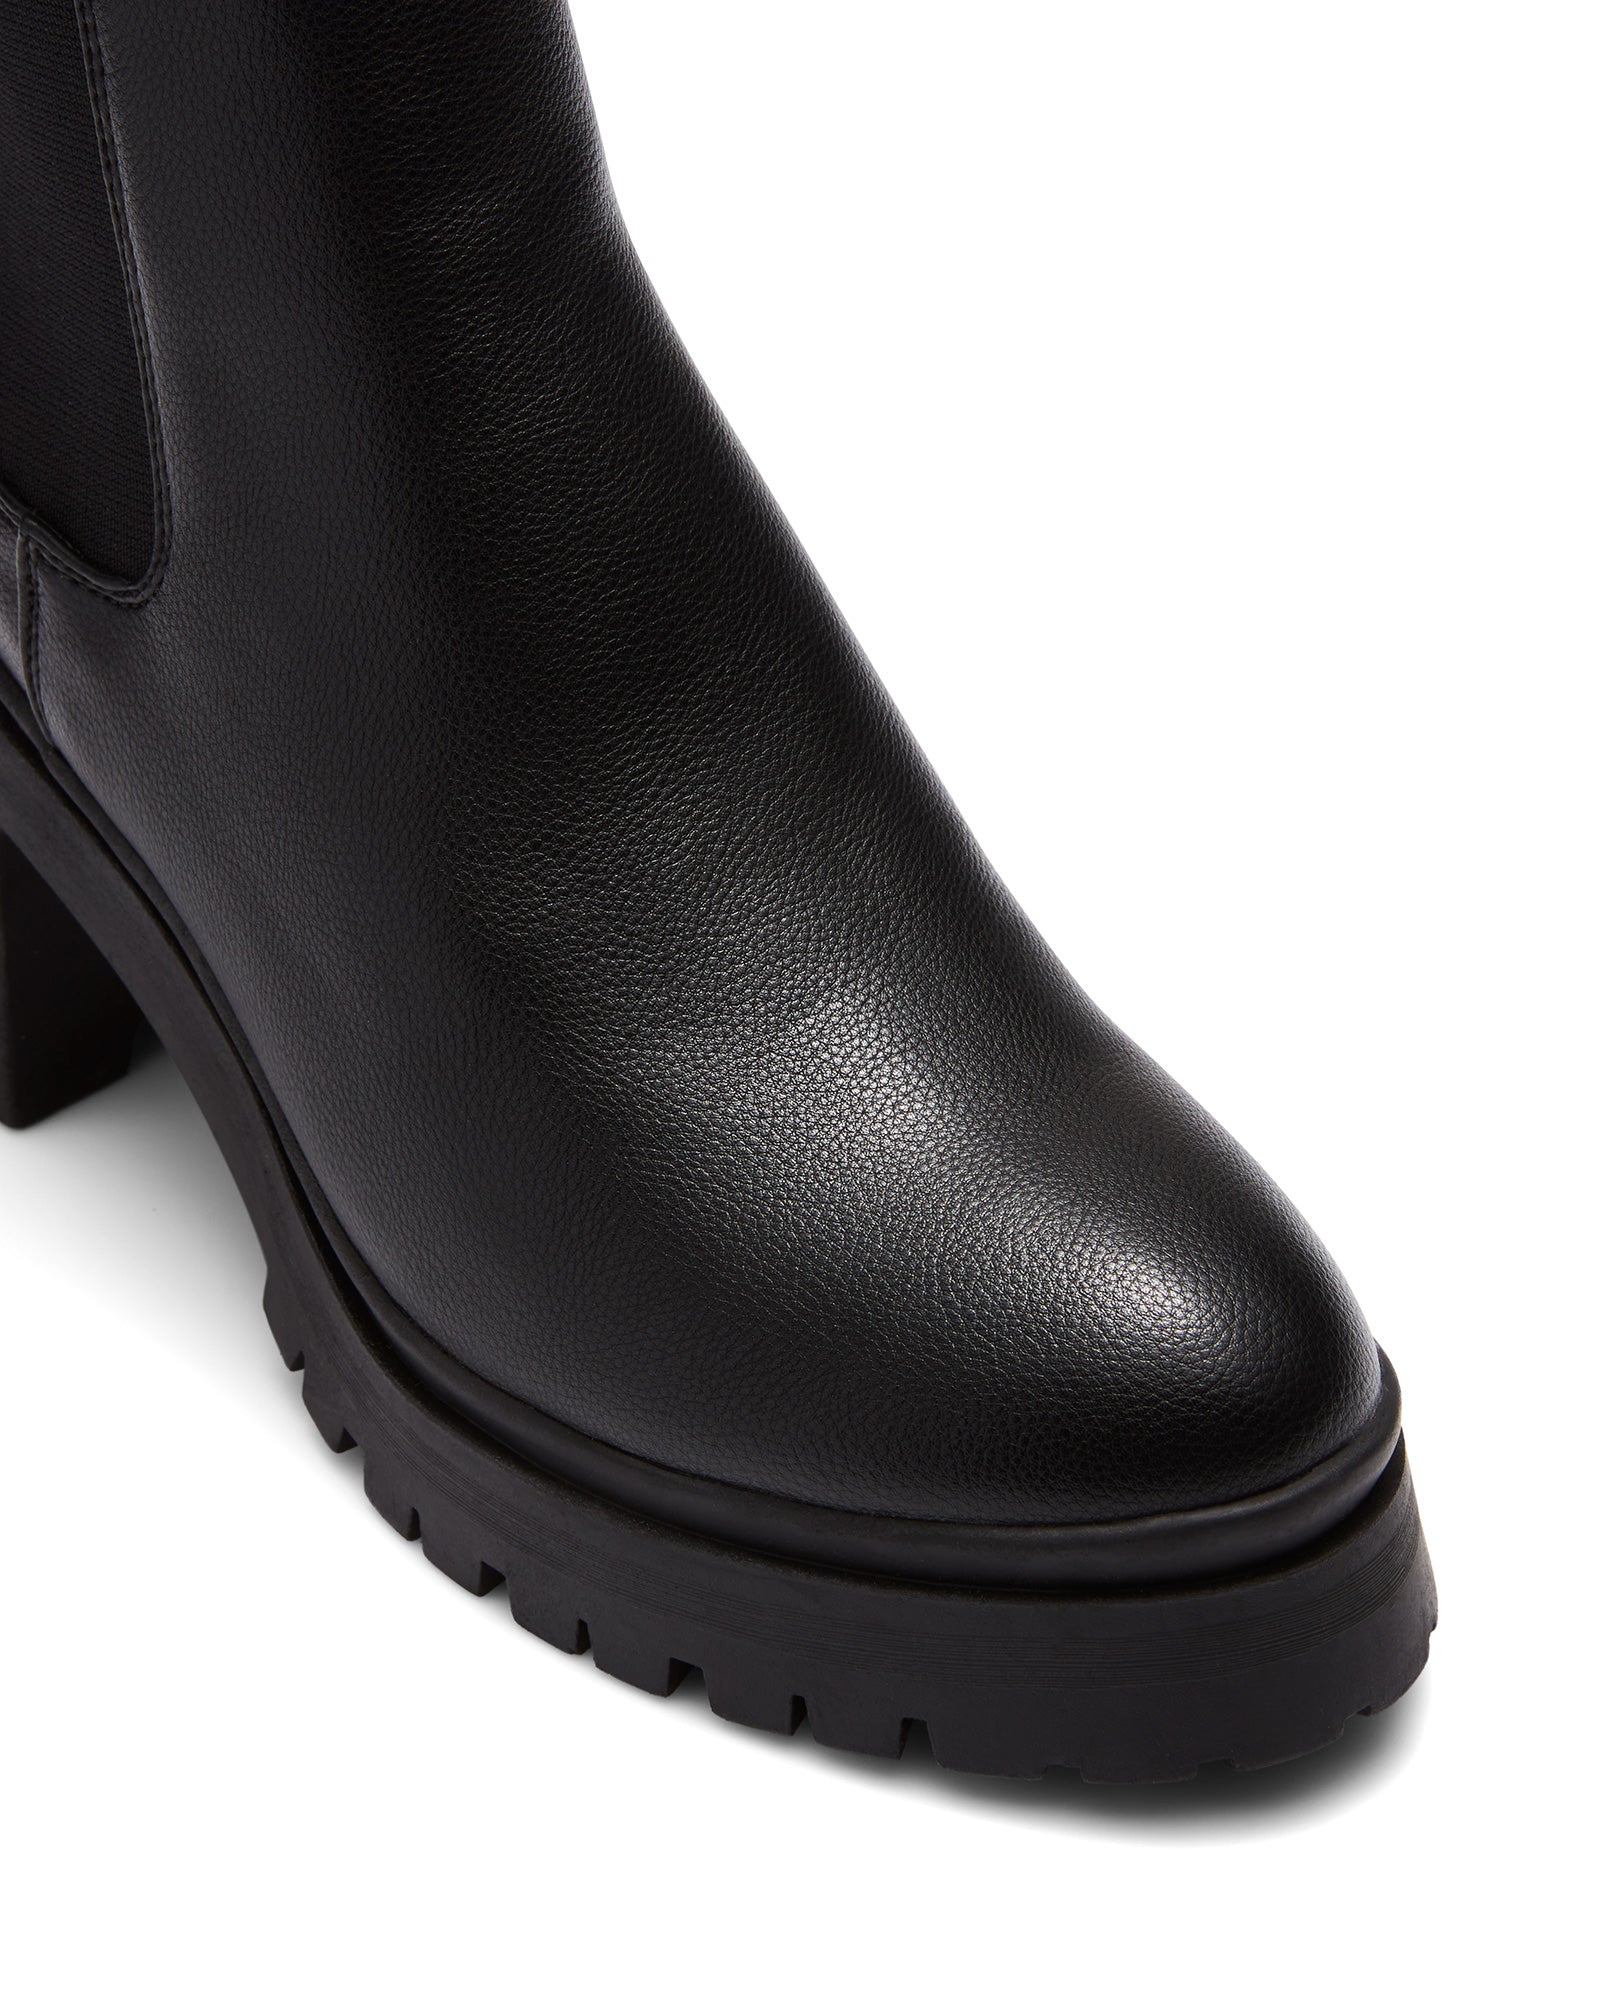 Therapy Shoes Giselle Black | Women's Ankle Boots | Chunky Heel | 90's